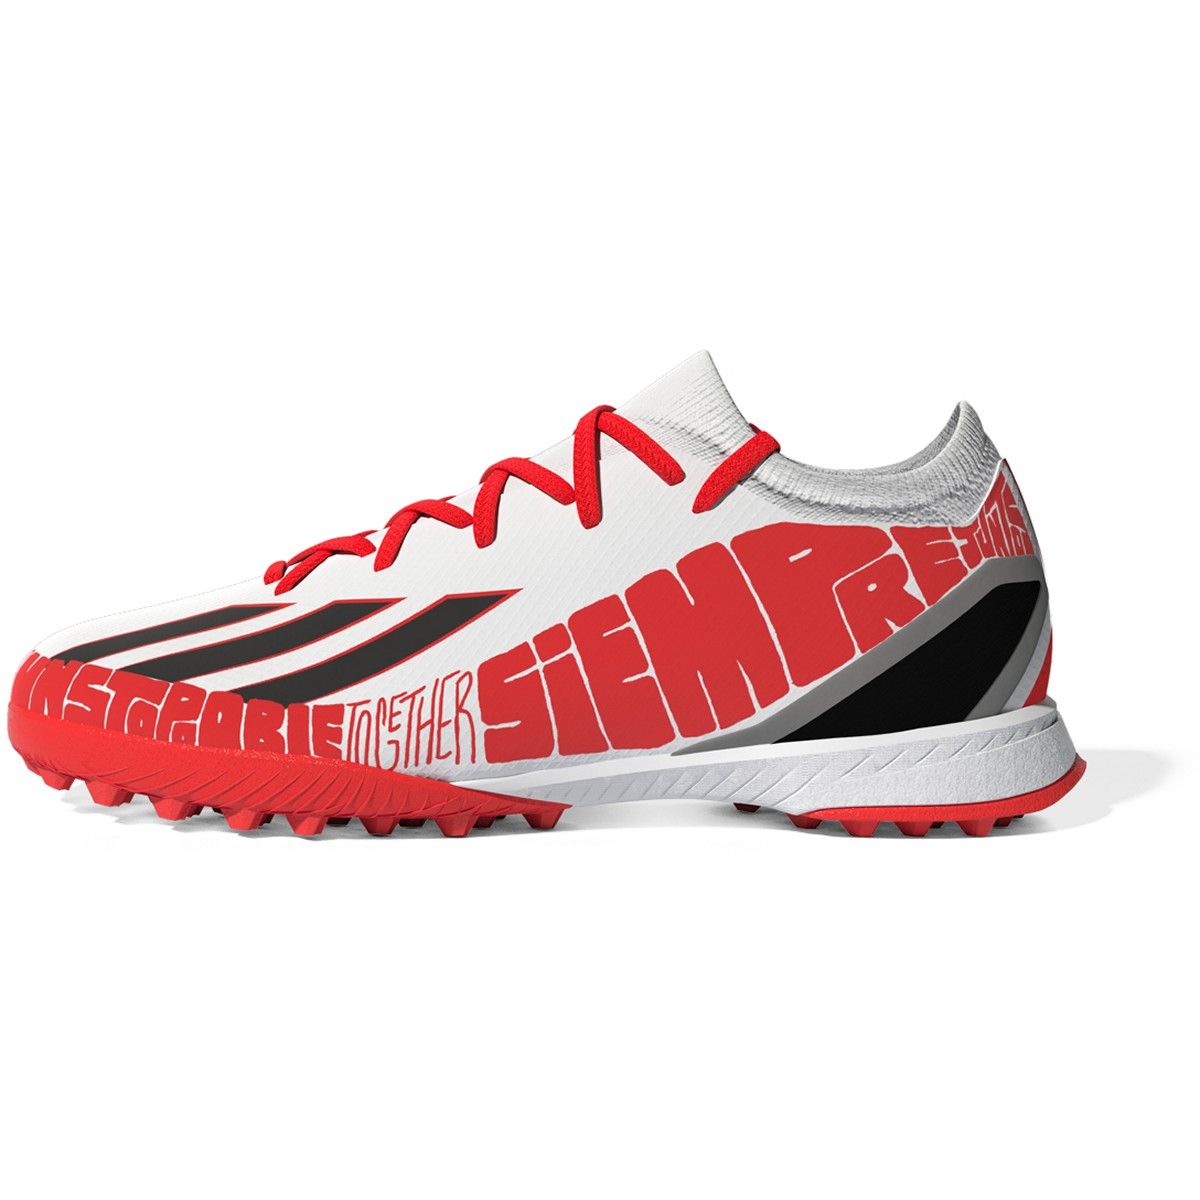 Wafel Egypte interieur adidas X SpeedPortal Messi.3 Turf Shoes in White and Red GW8395